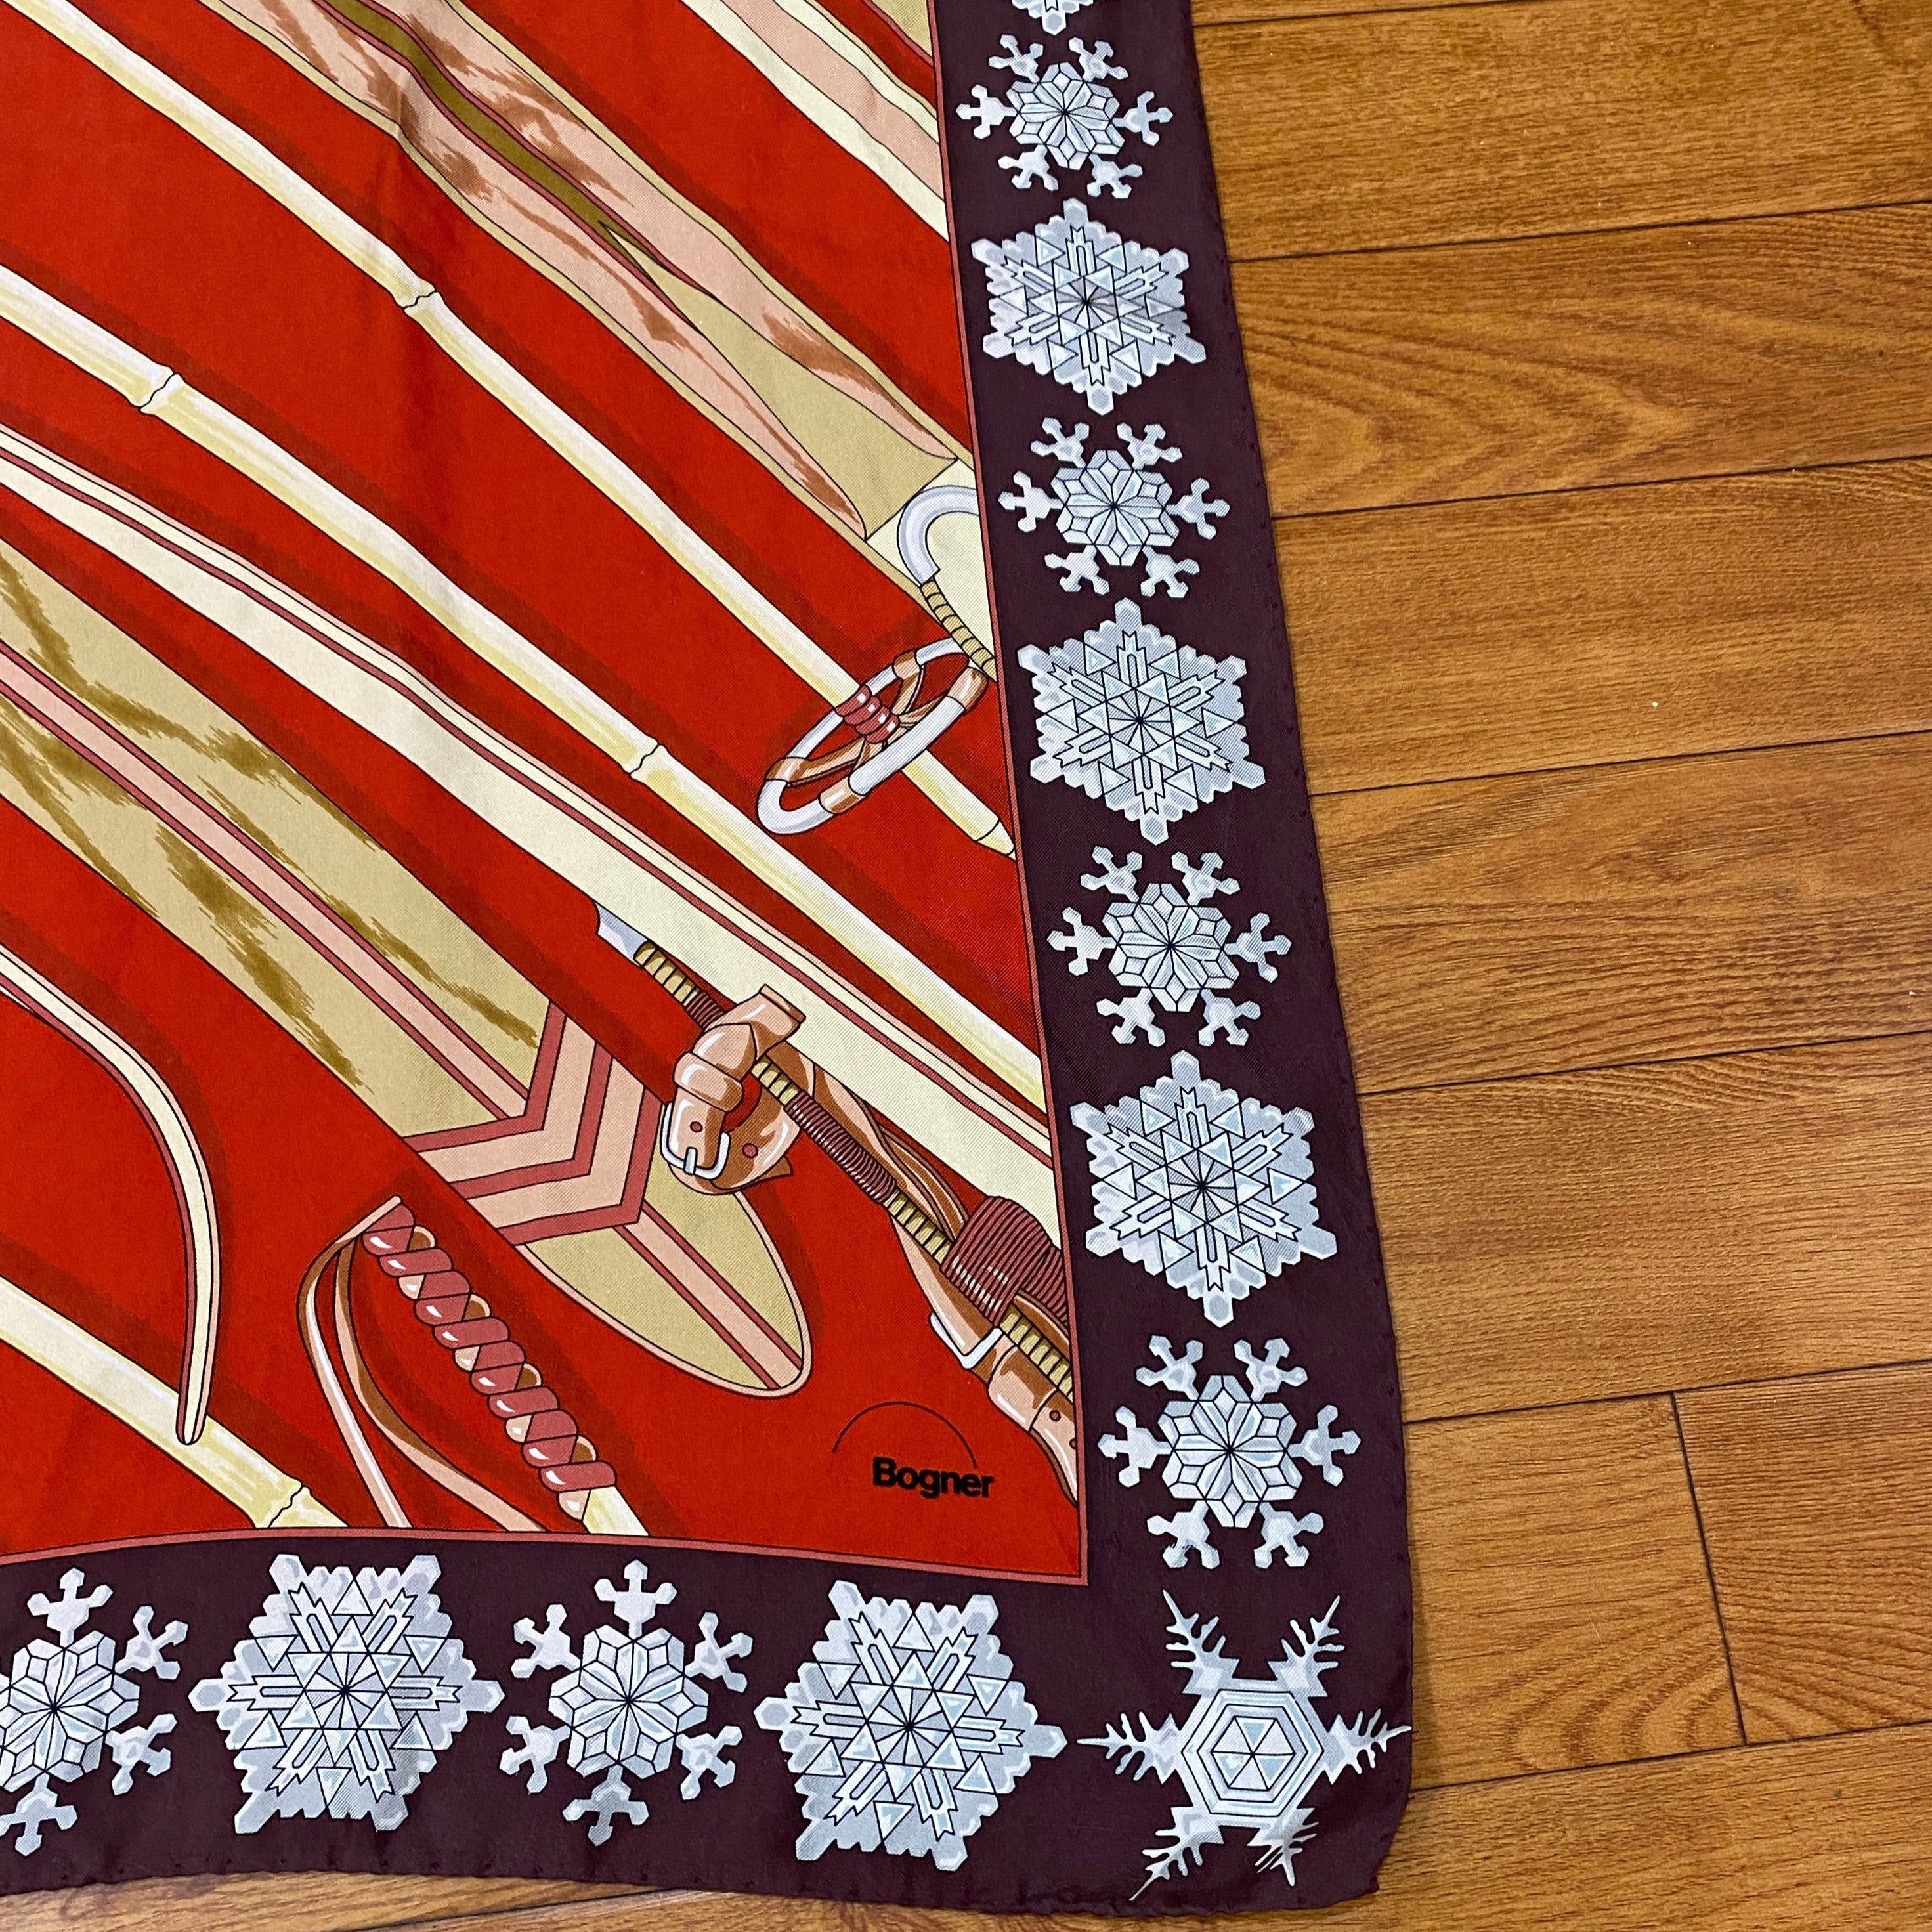 Bogner Silk Vintage Ski Scarf in red, brown white and beige. Snowflakes border the scarf, with the central square illustrating wooden skis and poles. Lower Right corner of scarf showing Bogner brand.Shown against wooden background